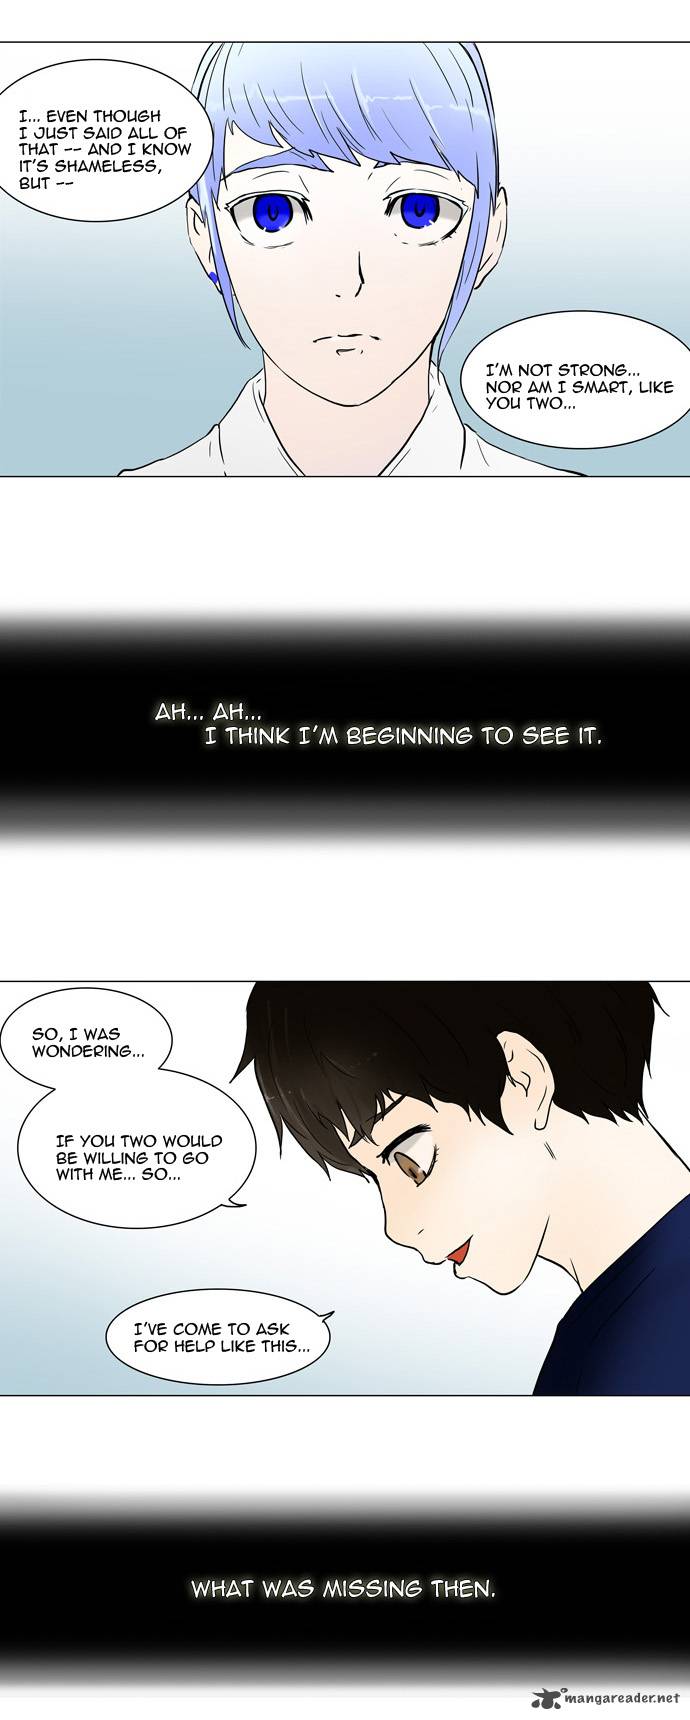 Tower Of God 53 19